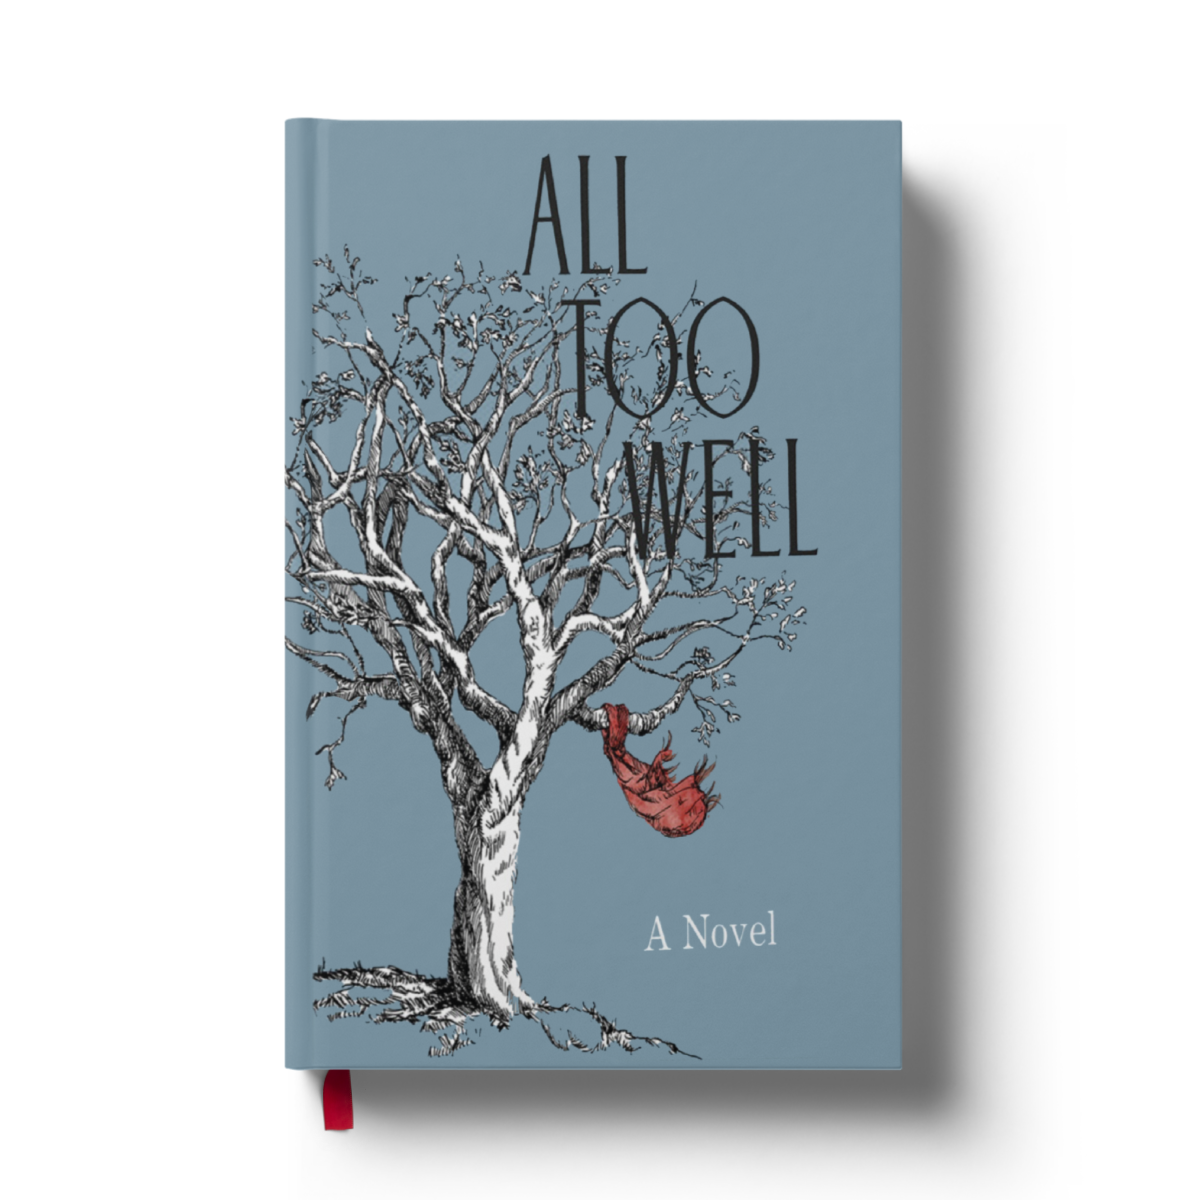 Kit "All Too Well"